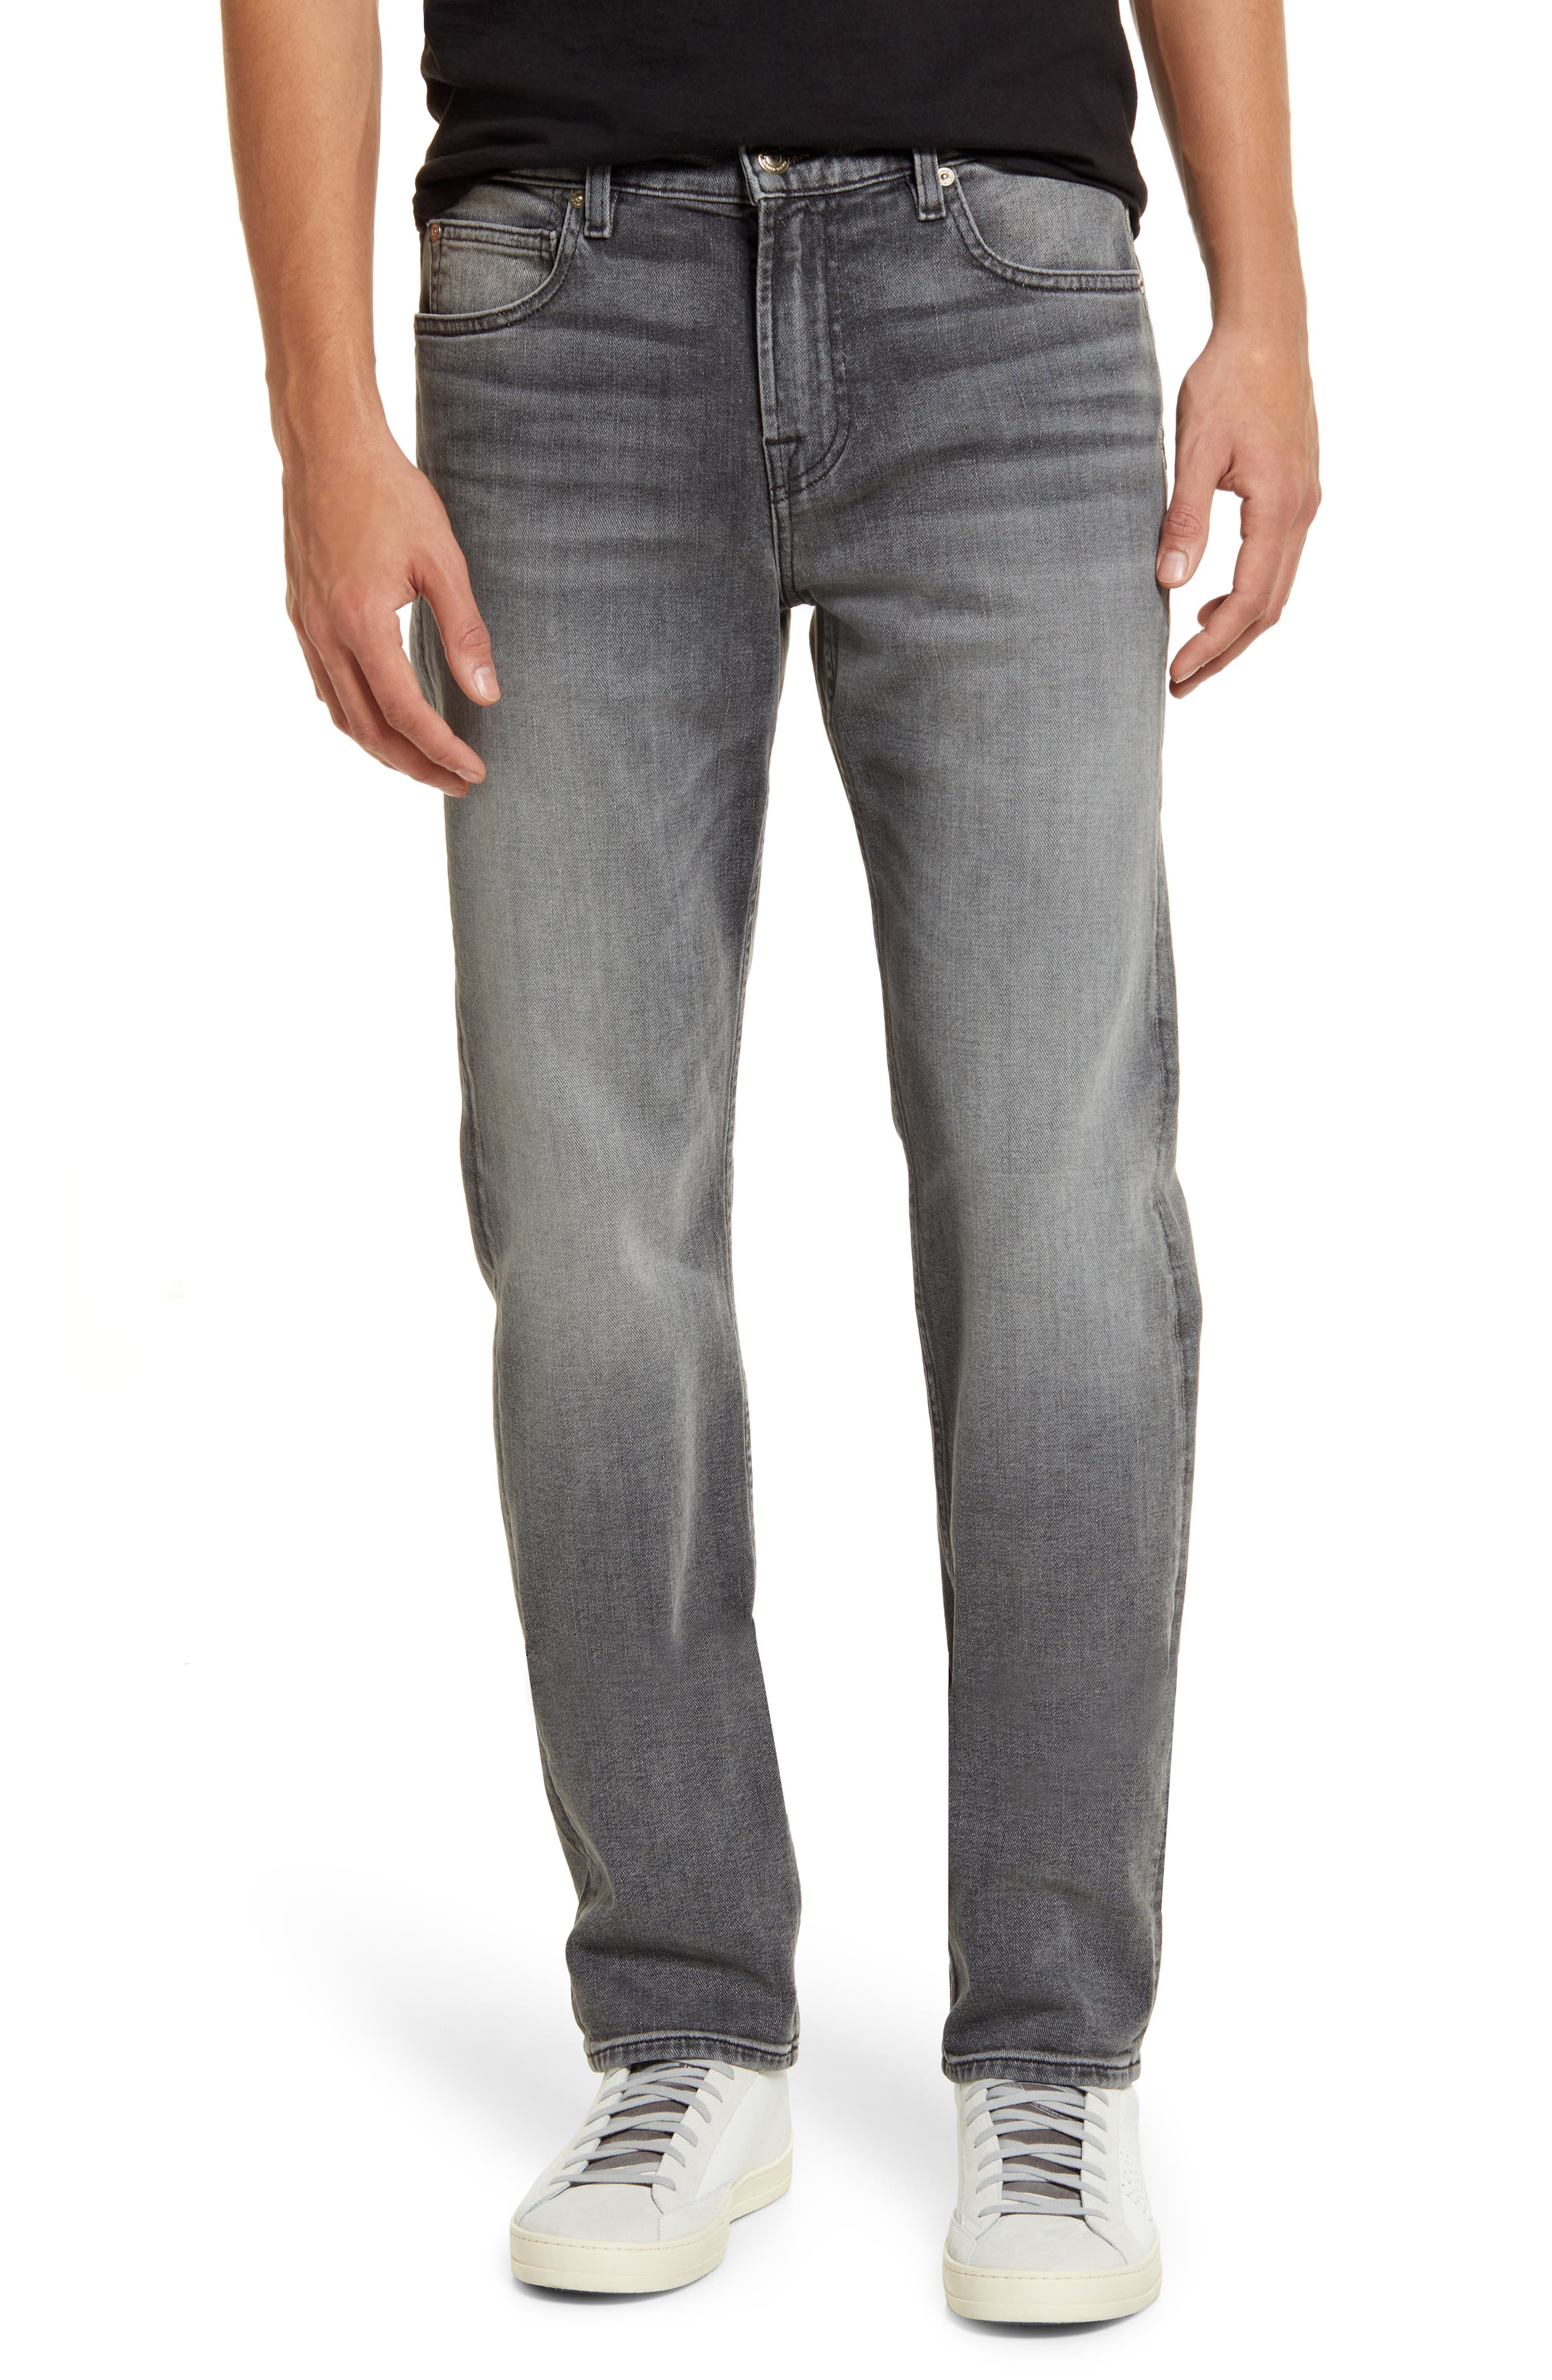 Retail $198 NWT Men's 7 For All ManKind Slimmy Slim Straight Leg Jeans